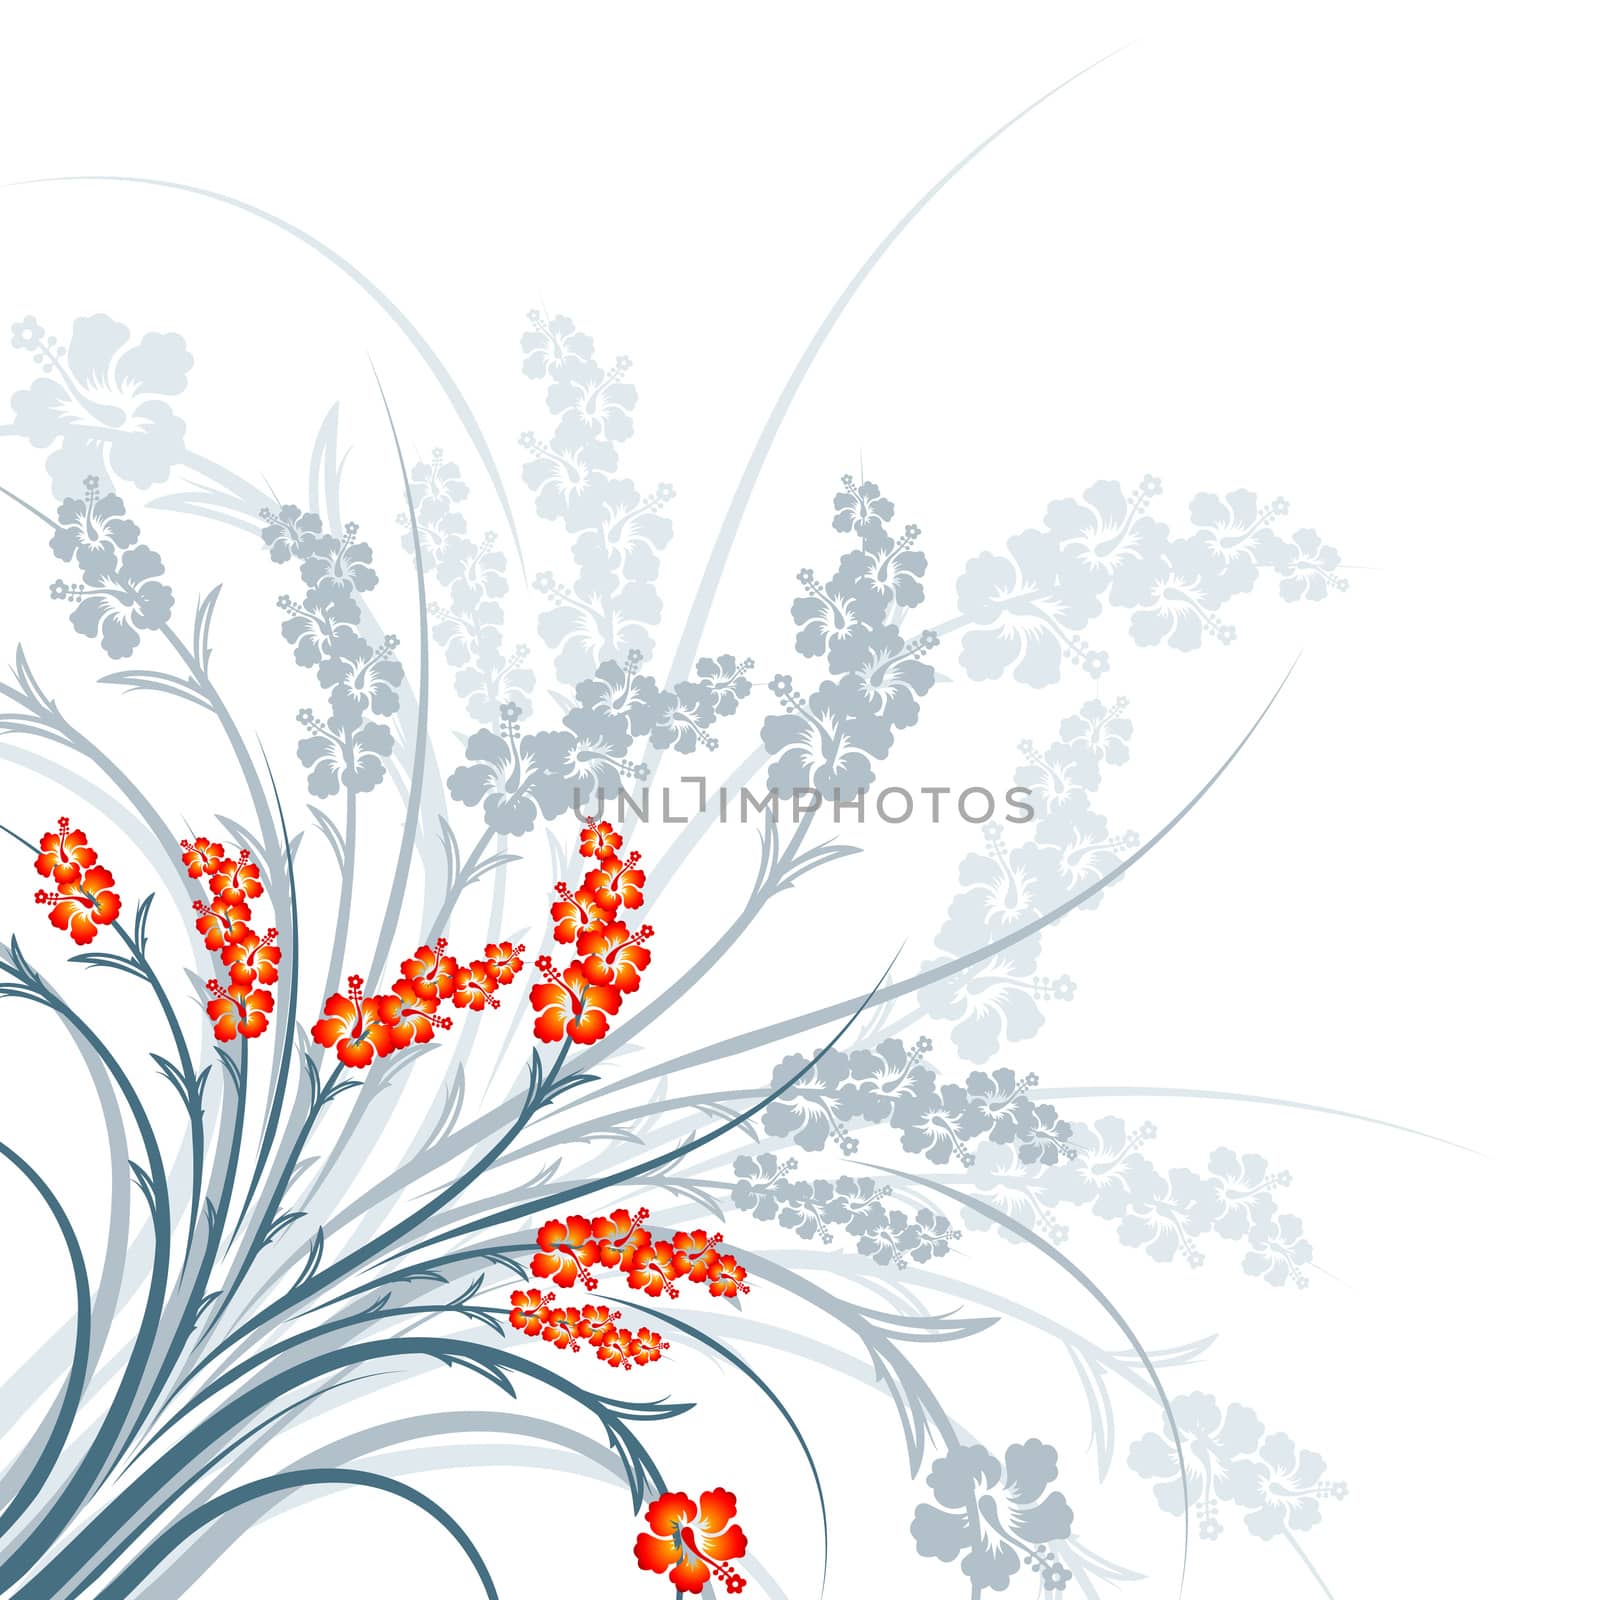 Abstract Spring Decorative Floral Background Vector Illustration